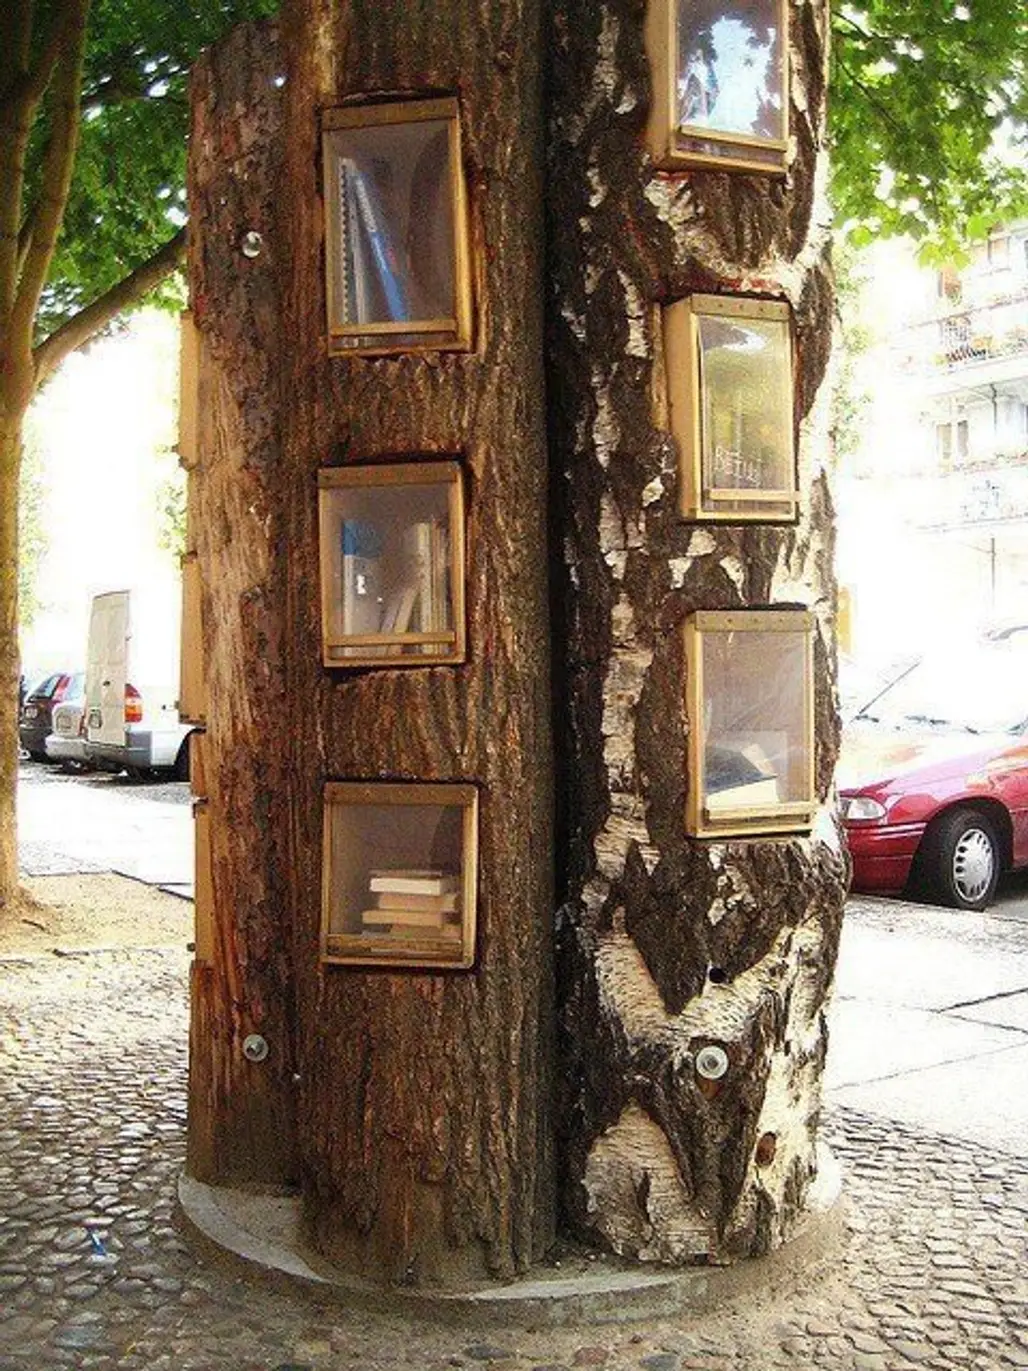 Borrow a Book from the Tree Library